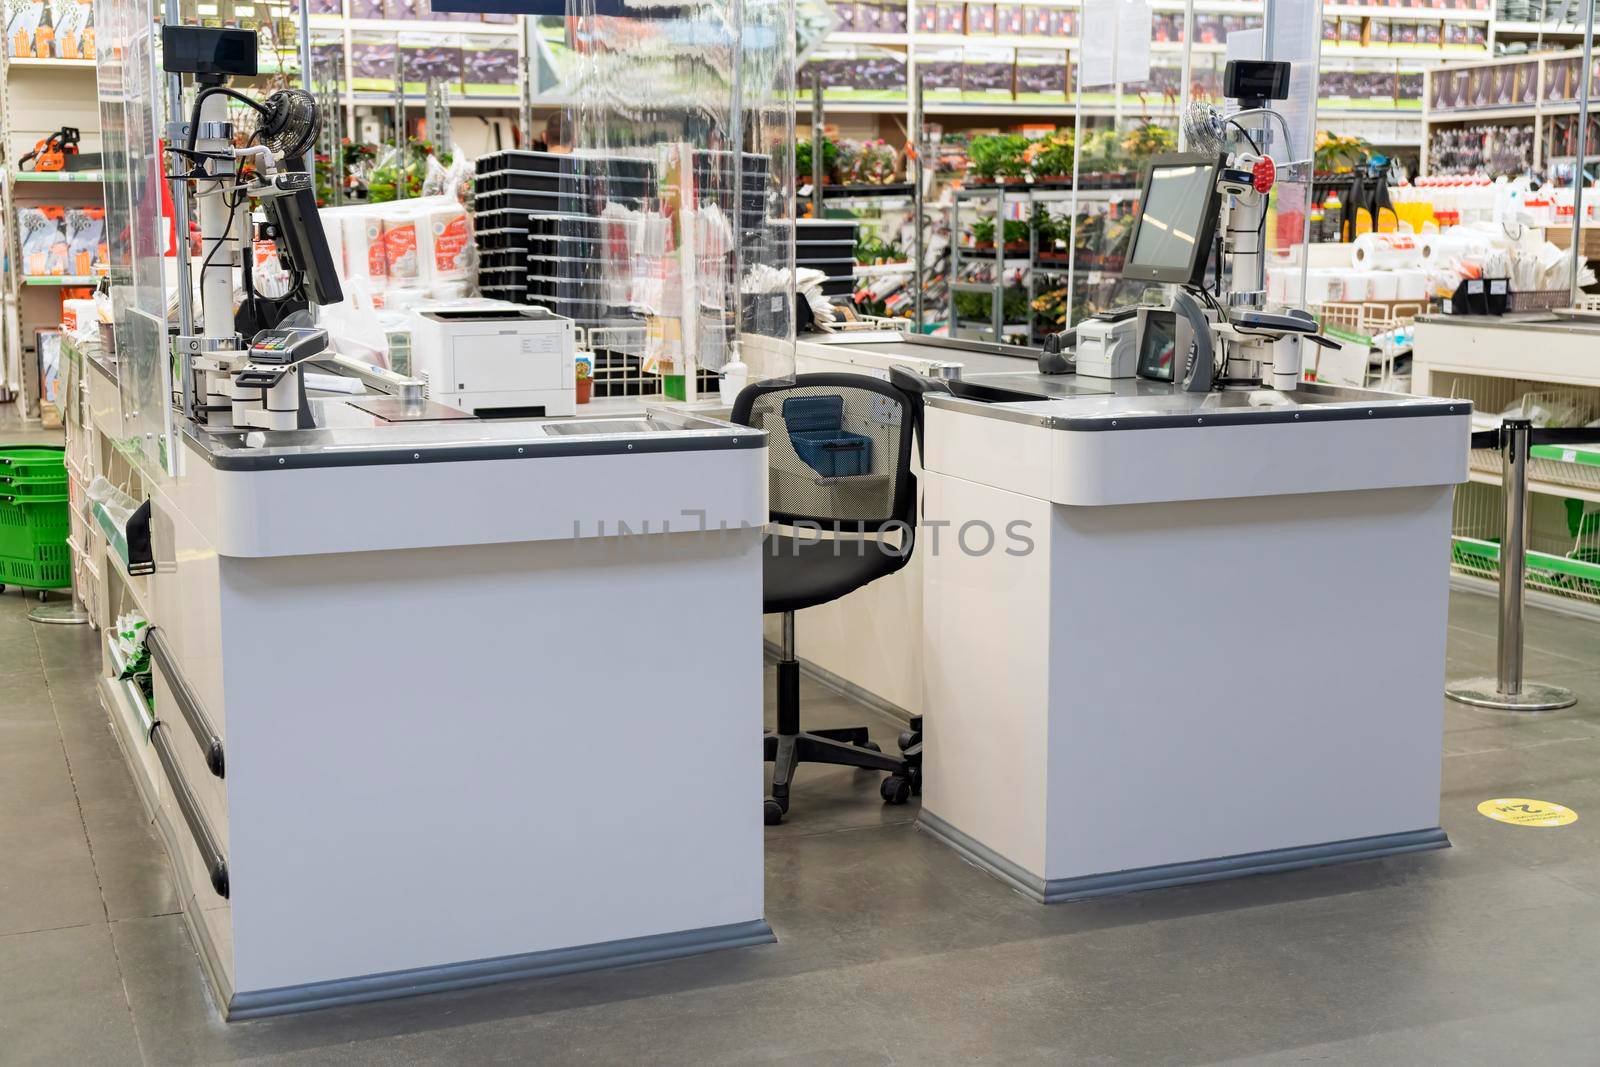 cash registers without people in the shopping center. High quality photo